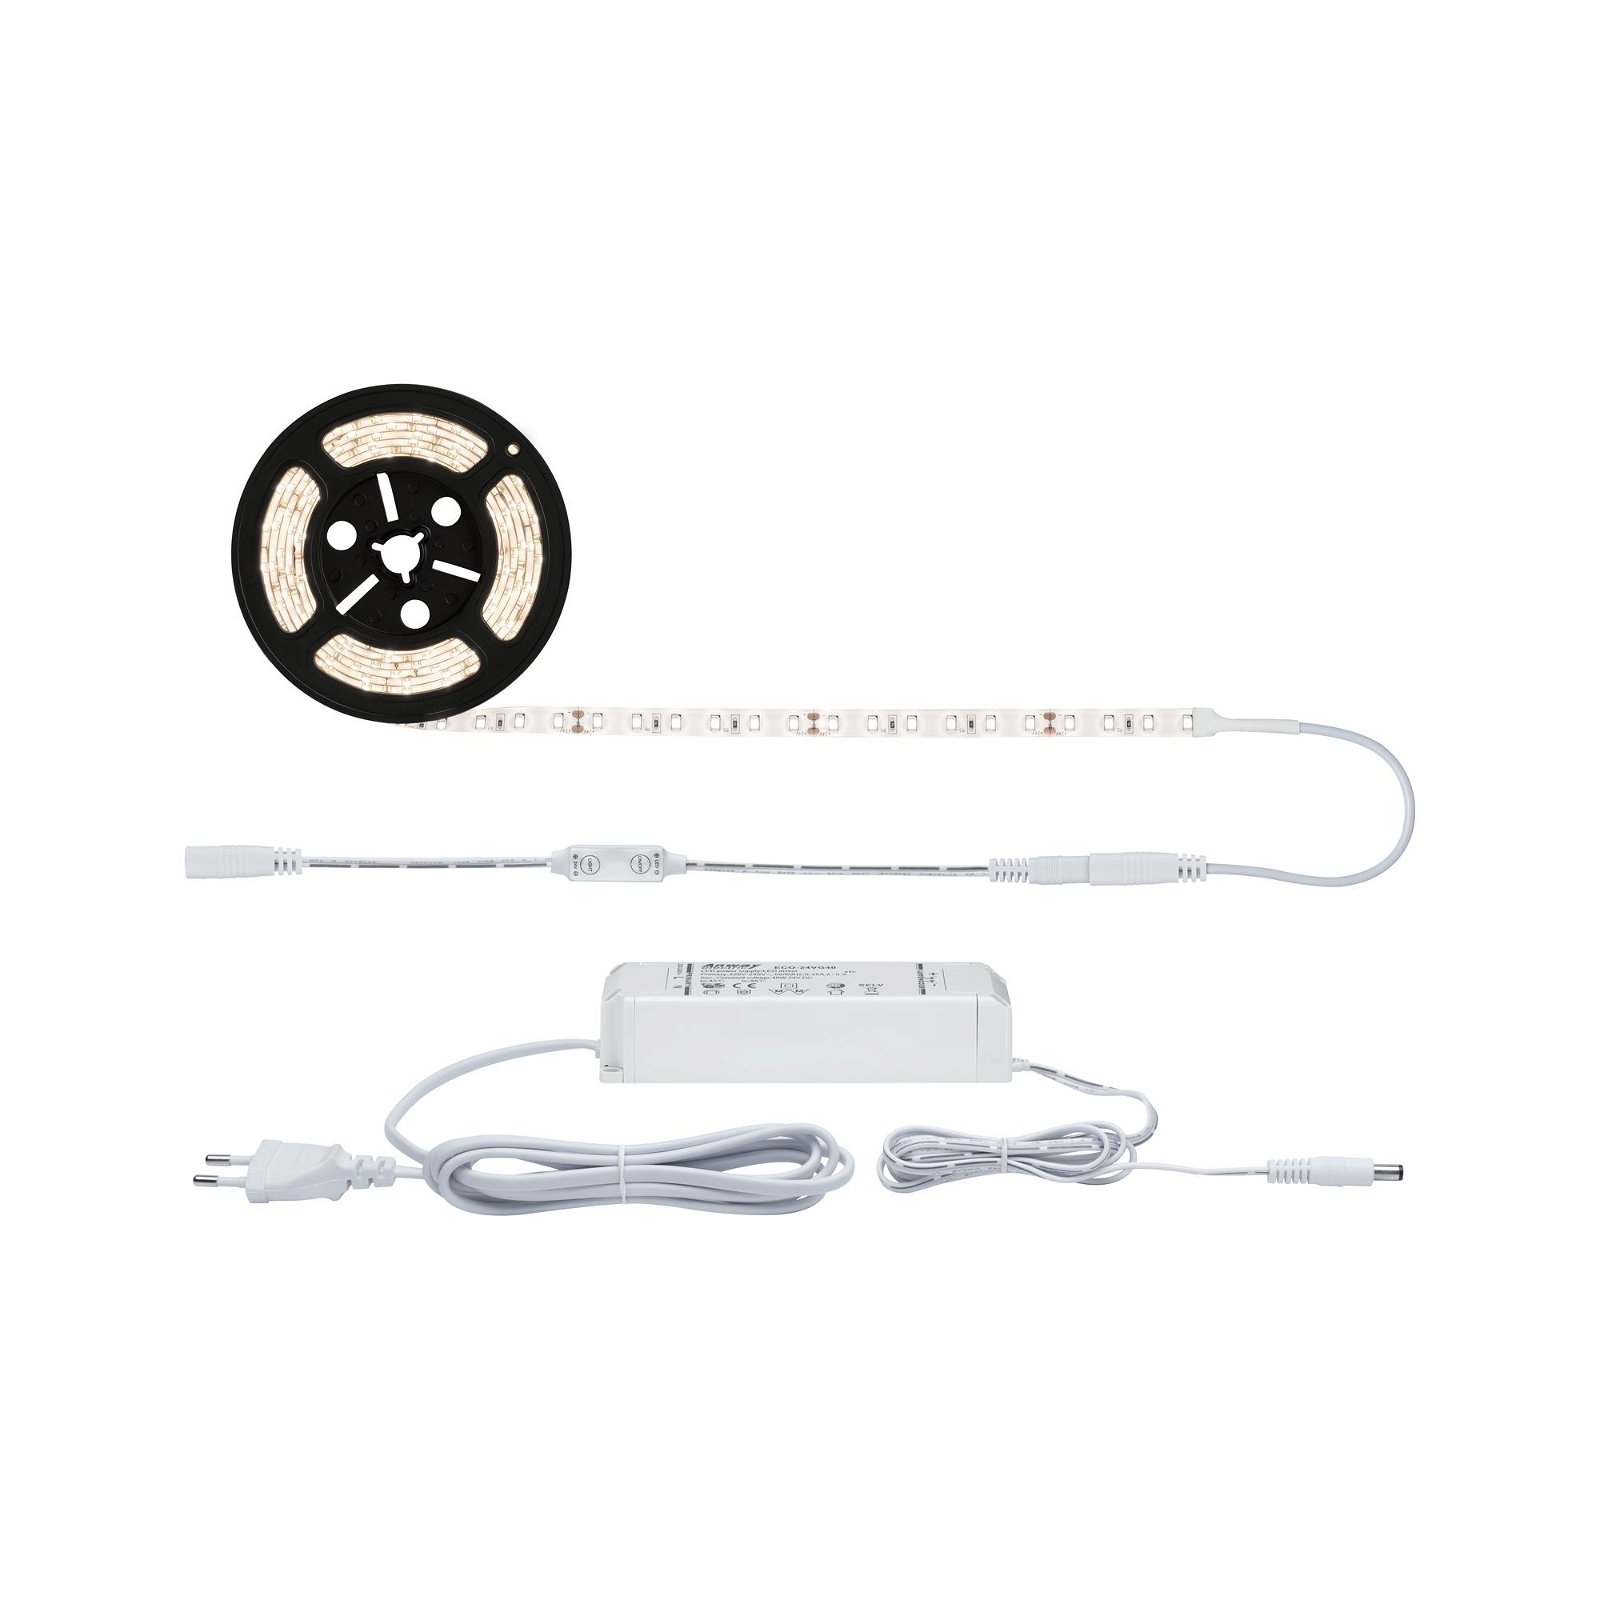 SimpLED Power LED Strip Warm white incl. Dimm/Switch Complete set 3m protect cover 33W 3300lm 3000K 48VA